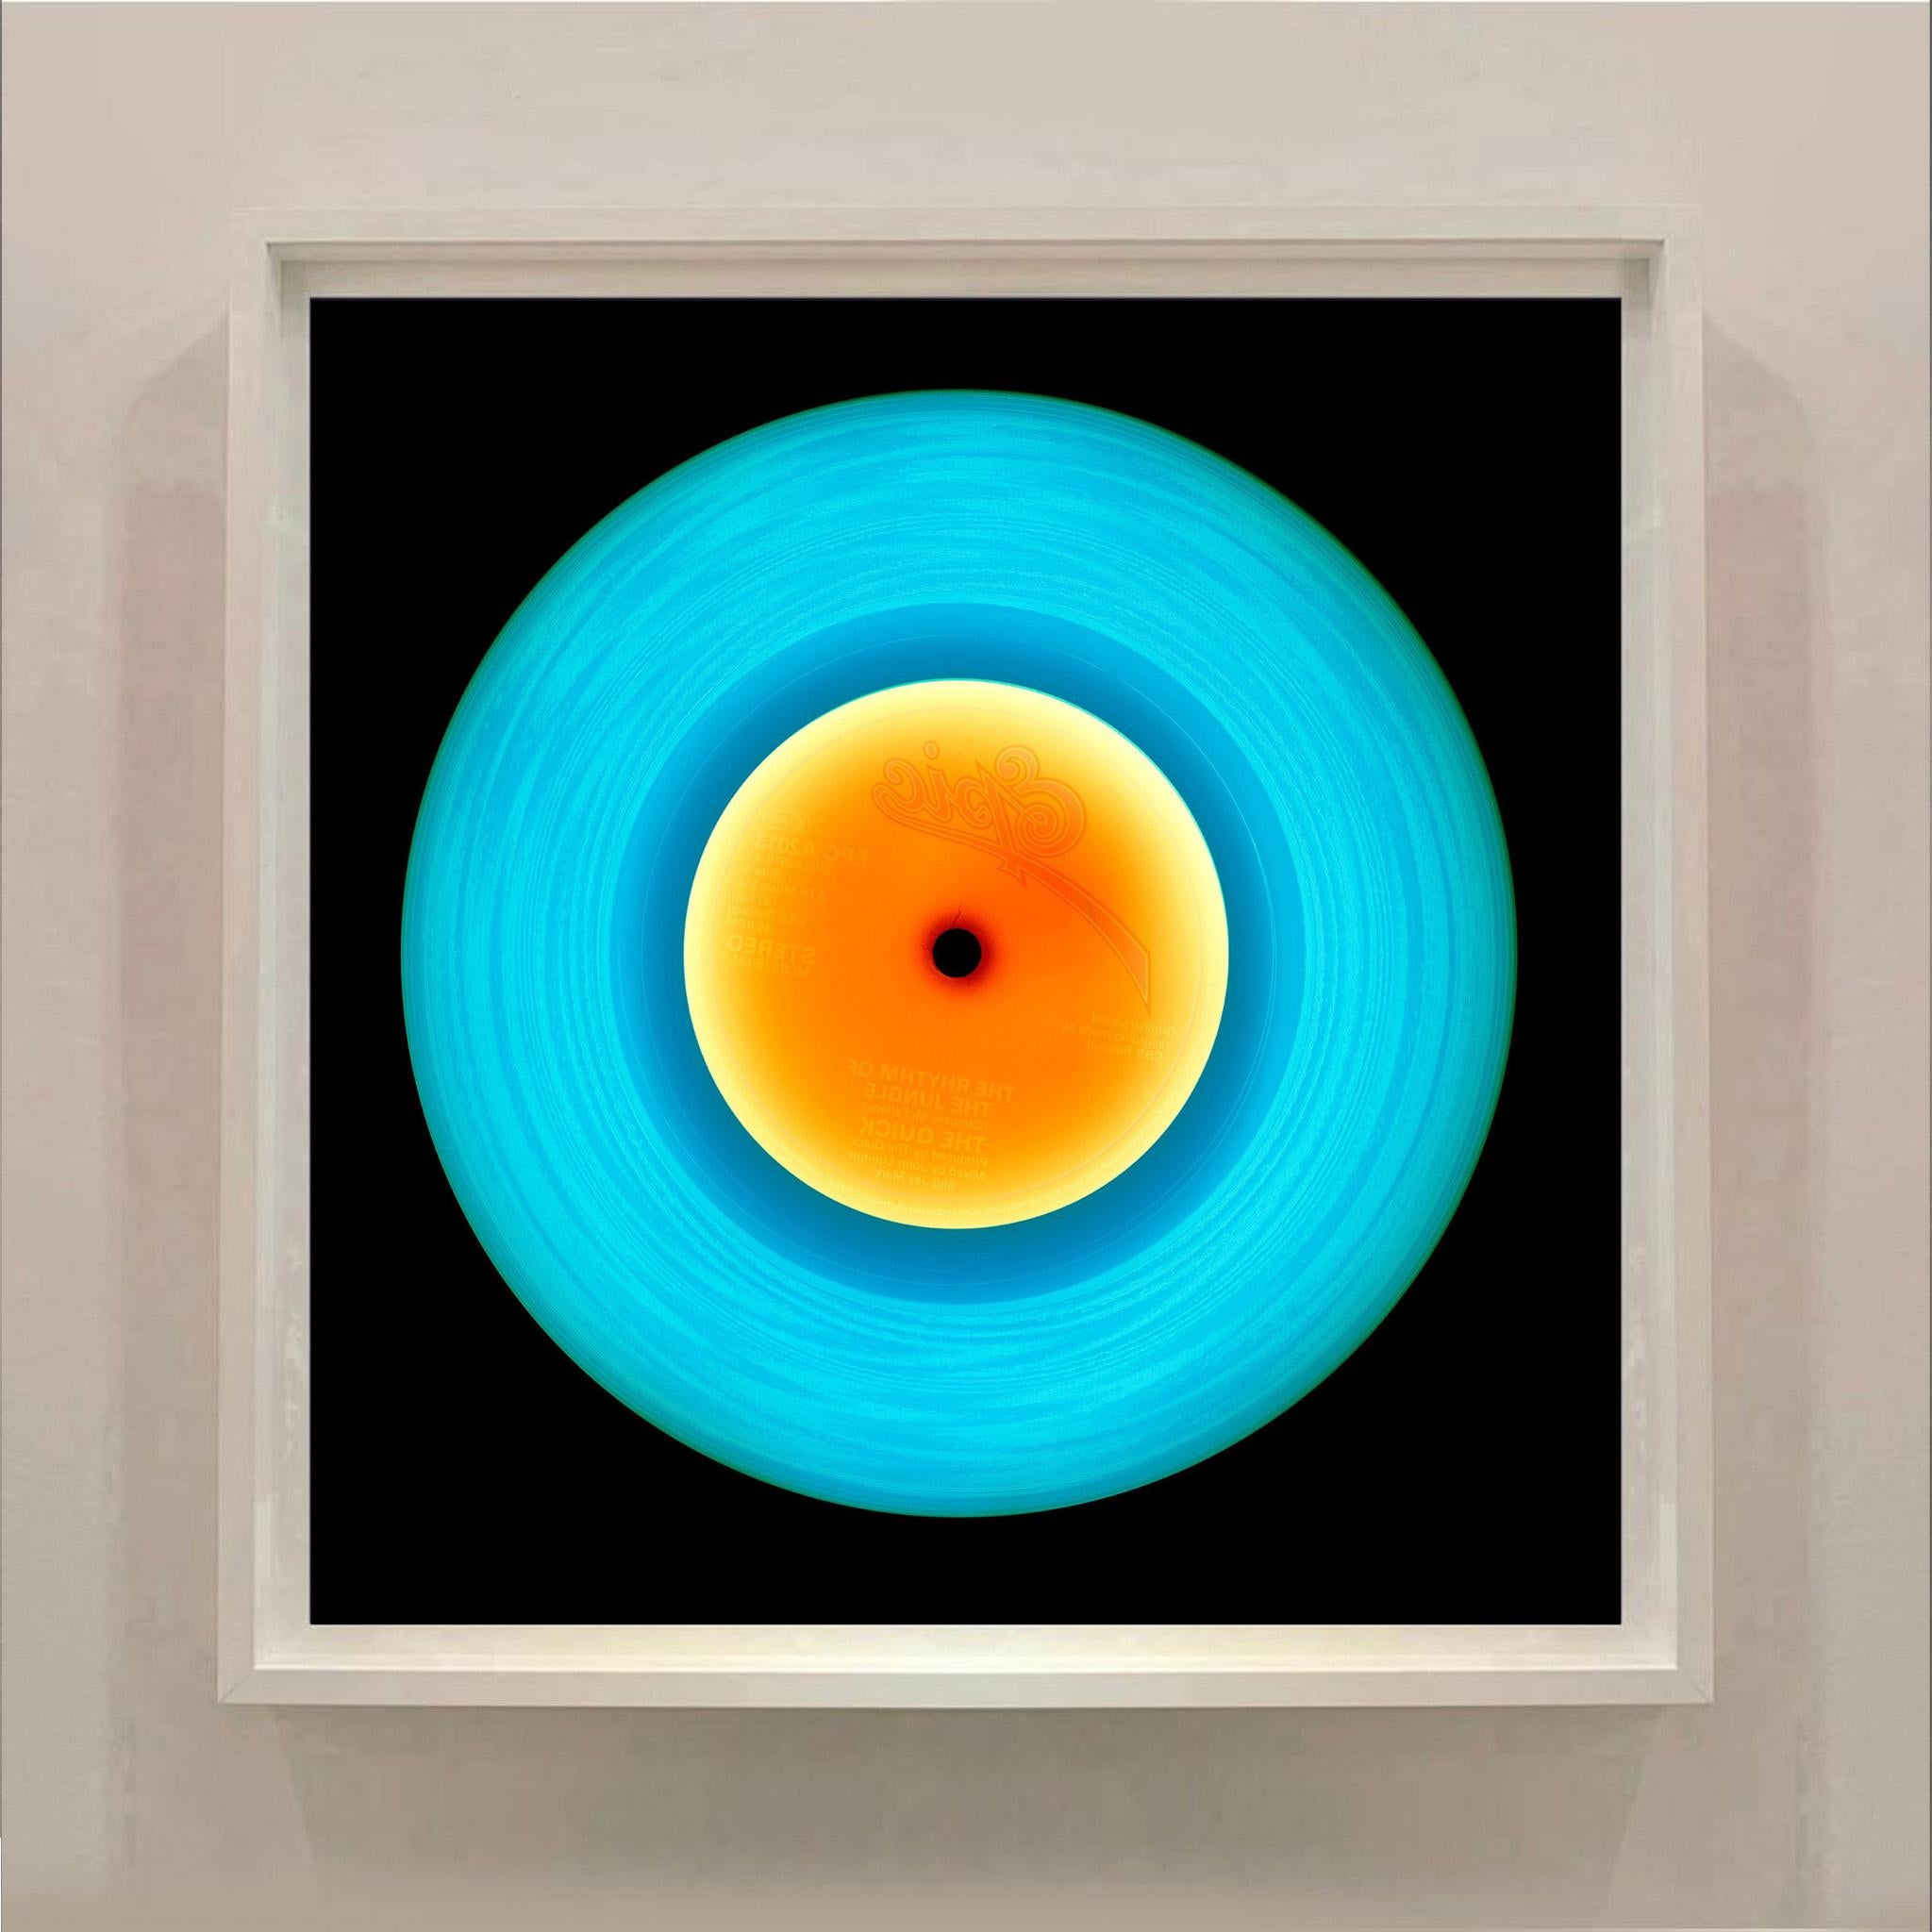 1981 Blue Orange from the Heidler and Heeps Vinyl Collection.
Acclaimed contemporary photographers, Richard Heeps and Natasha Heidler have collaborated to make this beautifully mesmerising collection. A celebration of the vinyl record and analogue